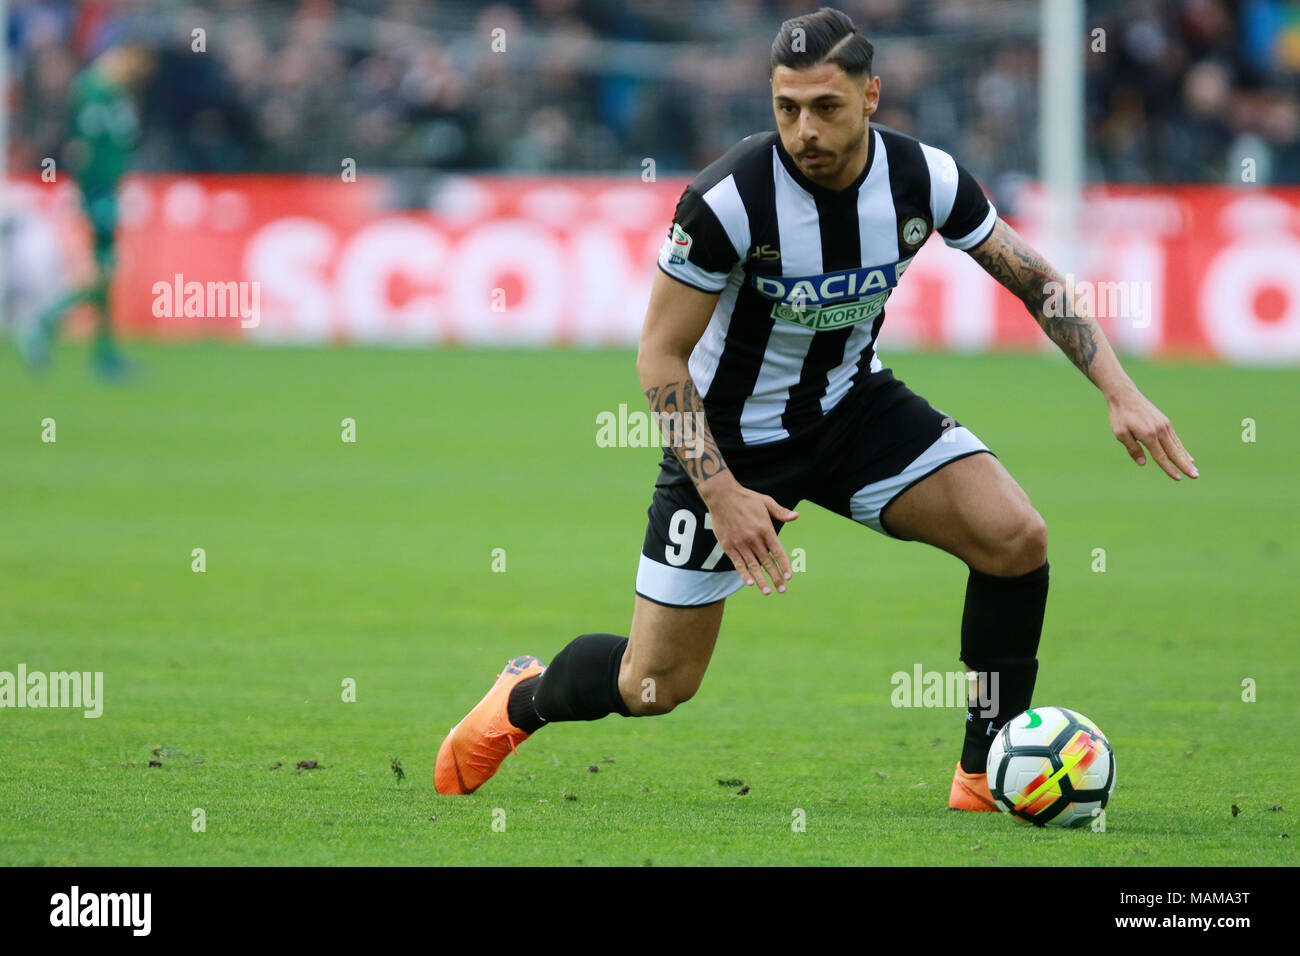 Udine, Italy. 3rd April, 2018. ITALY, Udine: Udinese's forward Giuseppe Pezzella controls the ball during the Serie A football match between Udinese Calcio v AC Fiorentina at Dacia Arena Stadium on 3rd April, 2018. Credit: Andrea Spinelli/Alamy Live News Stock Photo